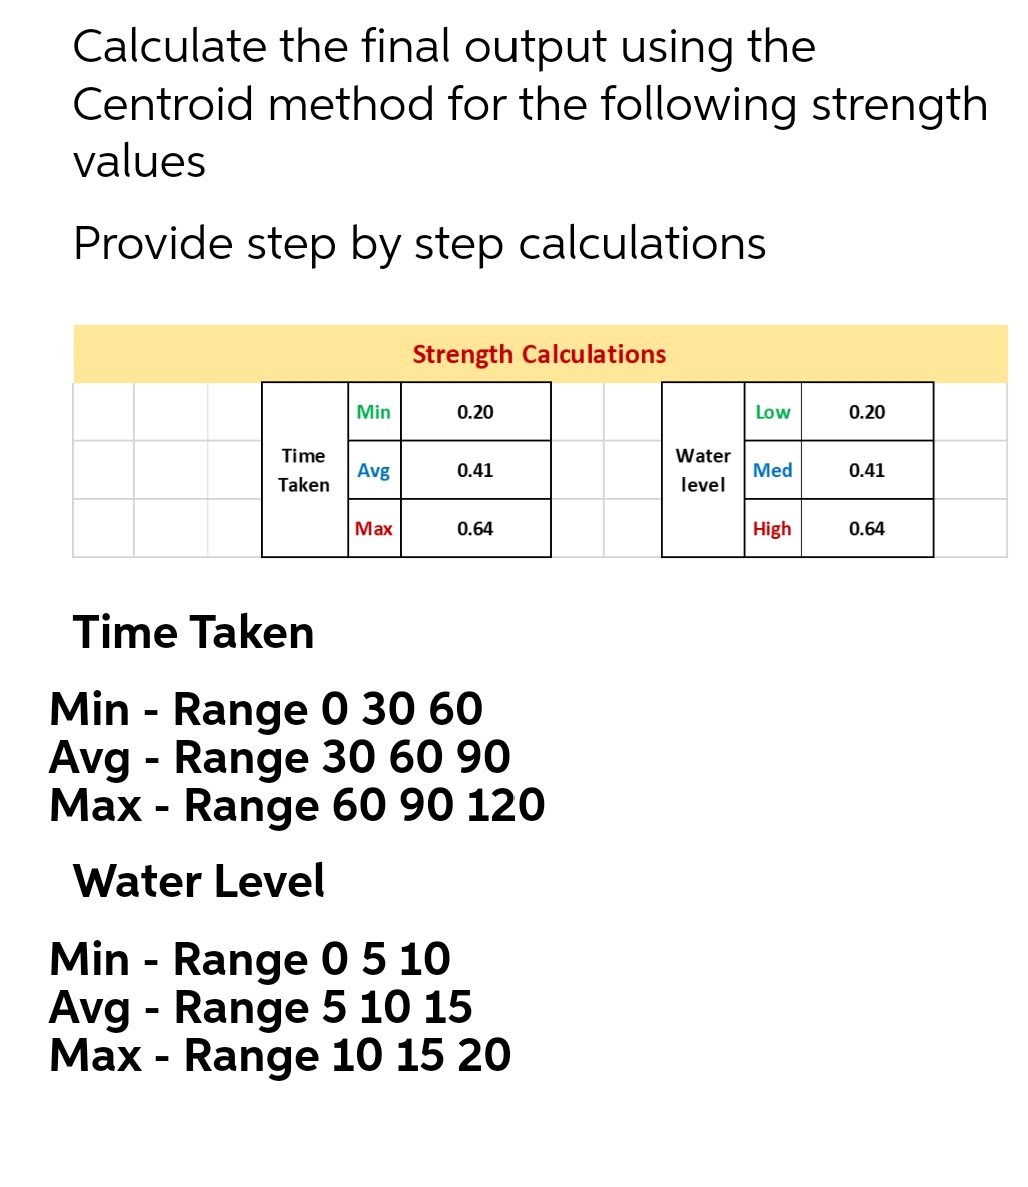 Calculate the final output using the
Centroid method for the following strength
values
Provide step by step calculations
Strength Calculations
Min
0.20
Low
0.20
Time
Water
Avg
0.41
Med
0.41
Taken
level
Маx
0.64
High
0.64
Time Taken
Min - Range 0 30 60
Avg - Range 30 60 90
Max - Range 60 90 120
Water Level
Min - Range 05 10
Avg - Range 5 10 15
Max - Range 10 15 20
